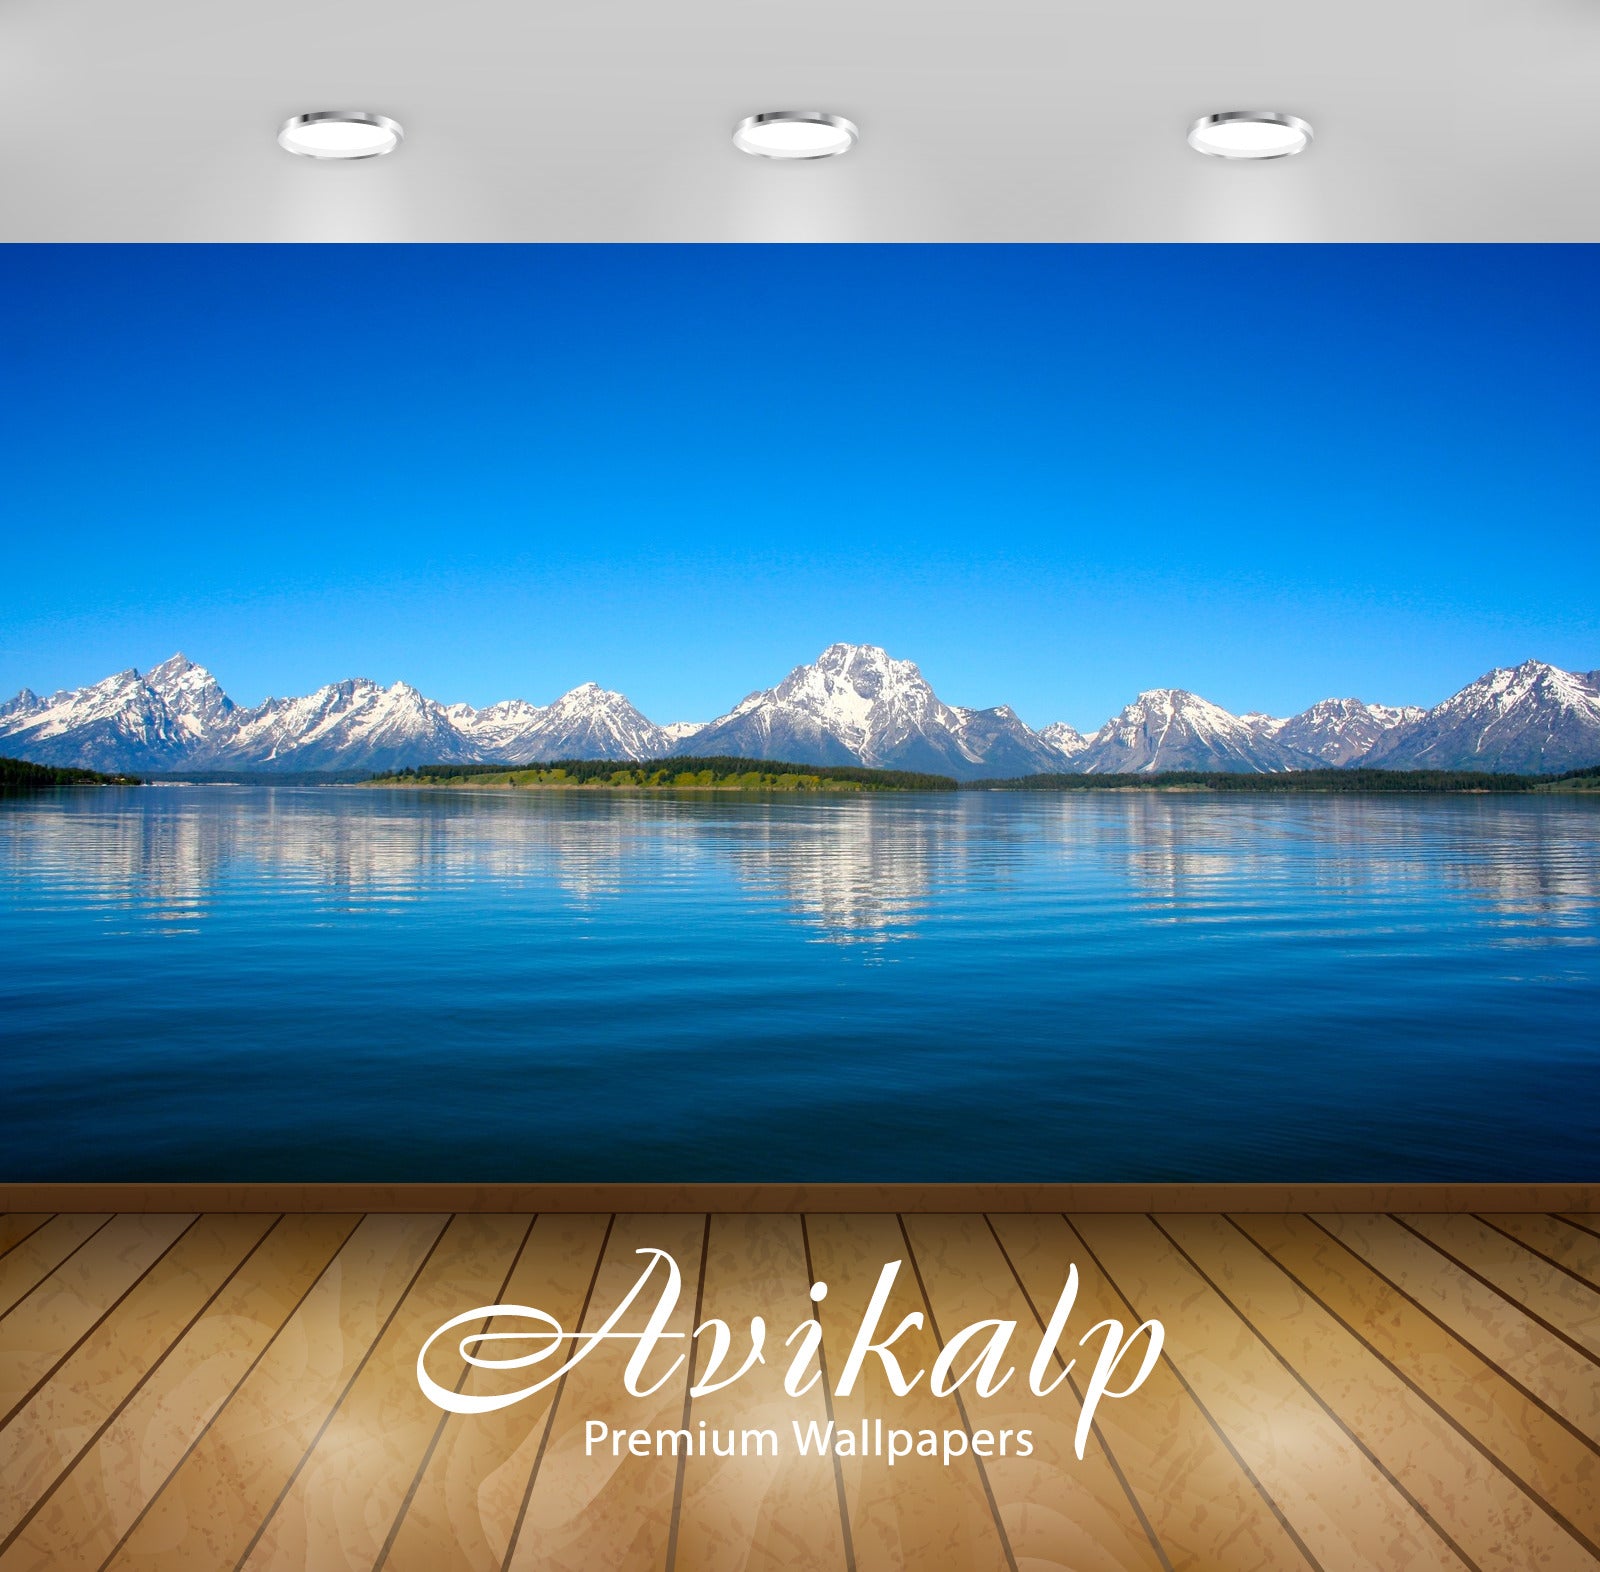 Avikalp Exclusive Awi1828 Snowy Mountains Lake Scenery Full HD Wallpapers for Living room, Hall, Kid